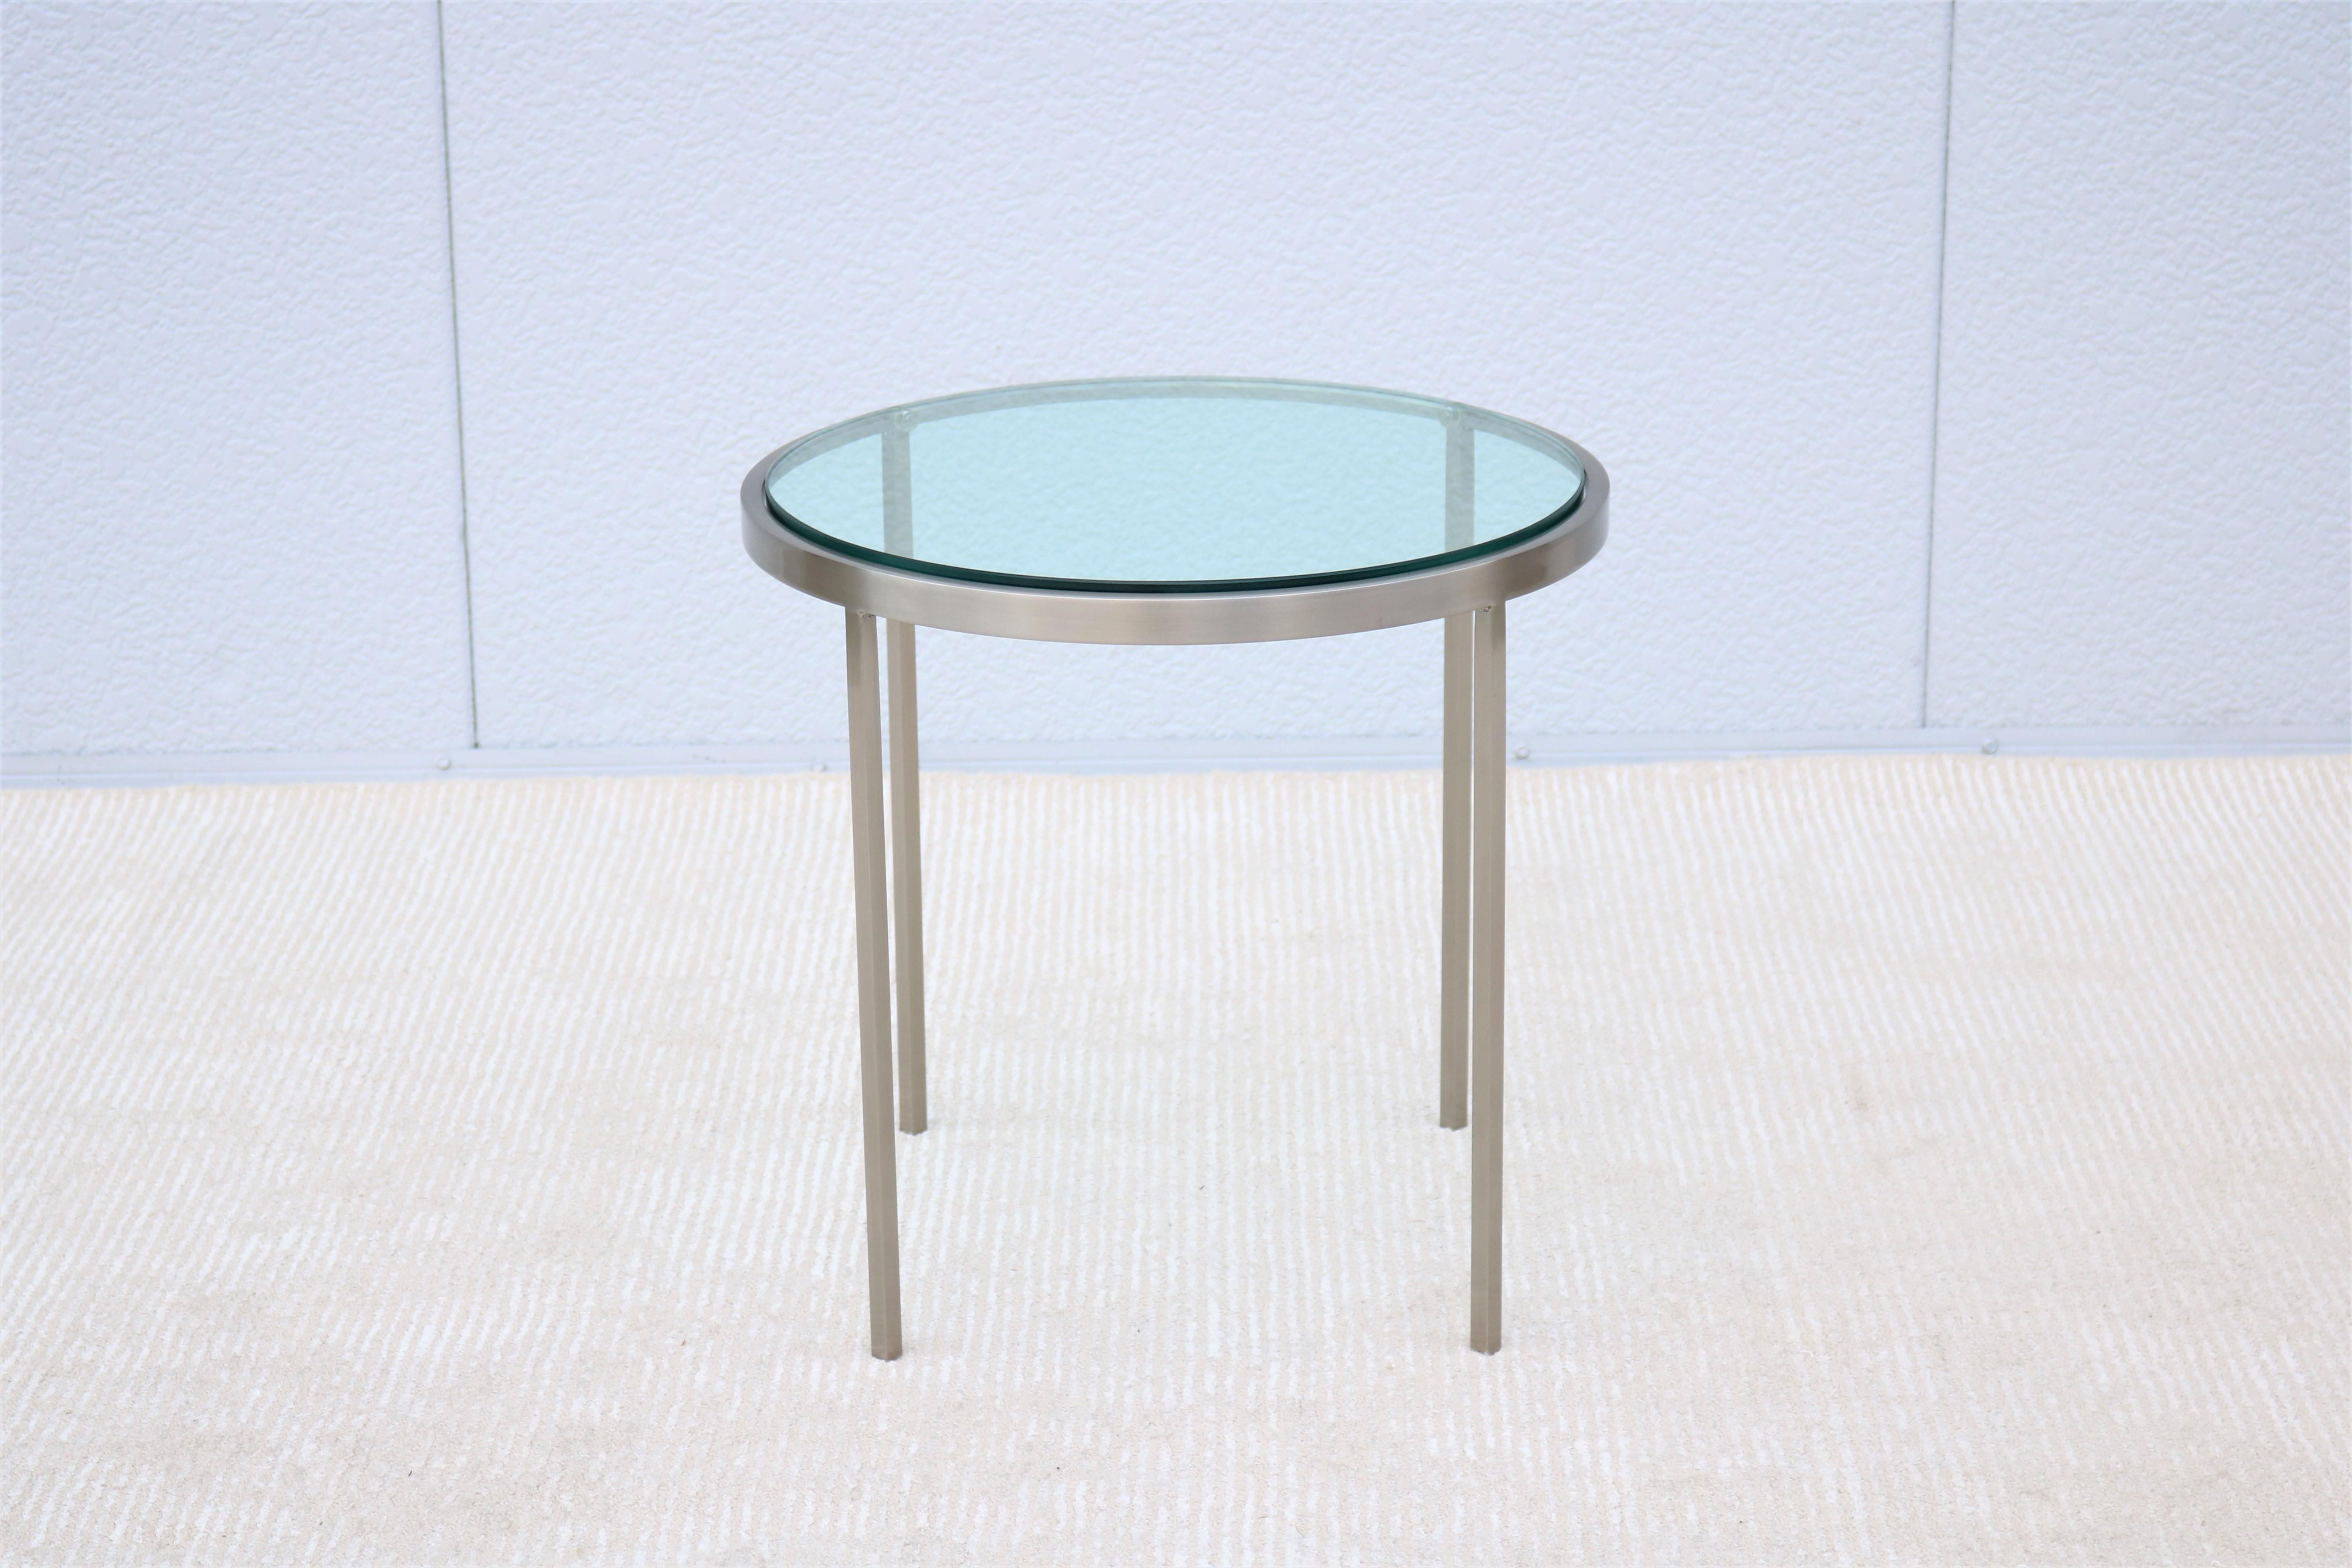 Minimalist Mid-Century Modern Milo Baughman Round Glass and Stainless-Steel Side End Table For Sale